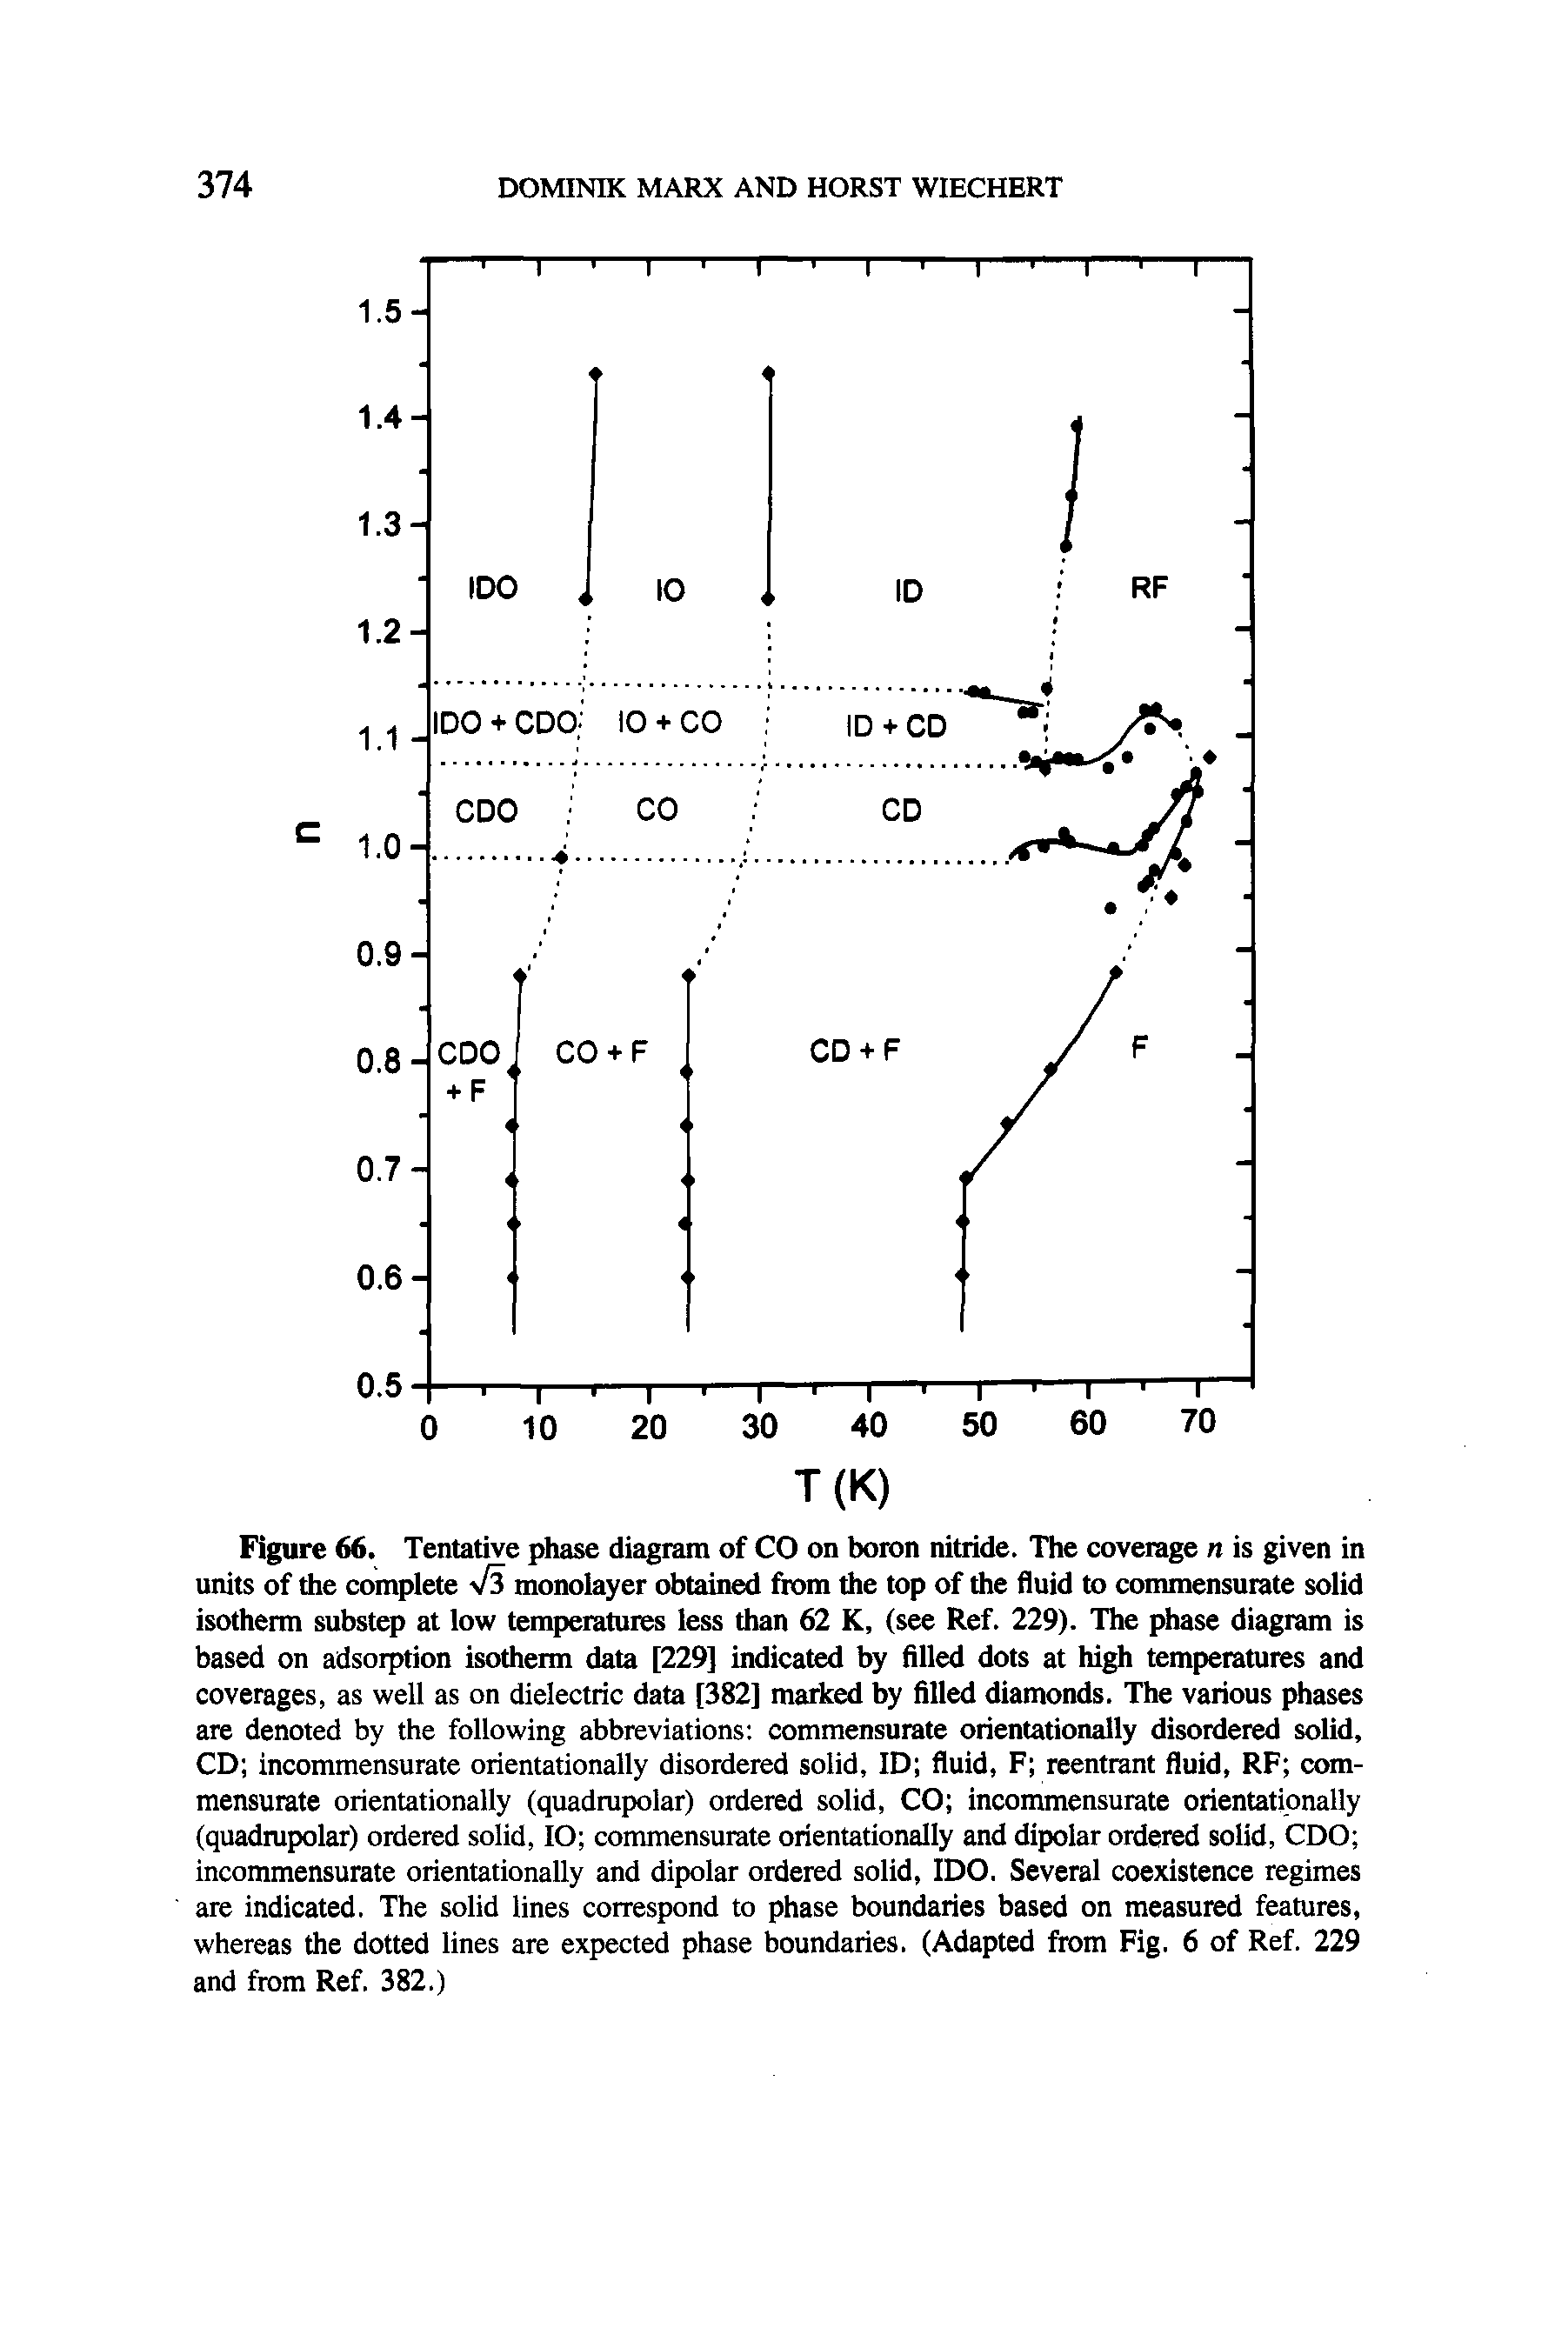 Figure 66. Tentative phase diagram of CO on boron nitride. The coverage n is given in units of the complete -v/s monolayer obtained from the top of the fluid to commensurate solid isotherm substep at low temperatures less than 62 K, (see Ref. 229). The phase diagram is based on adsorption isotherm data [229] indicated by filled dots at high temperatures and coverages, as well as on dielectric data [382] marked by filled diamonds. The various phases are denoted by the following abbreviations commensurate orientationally disordered solid, CD incommensurate orientationally disordered solid, ID fluid, F reentrant fluid, RF commensurate orientationally (quadrupolar) ordered solid, CO incommensurate orientationally (quadmpolar) ordered solid, lO commensurate orientationally and dipolar ordered solid, CDO incommensurate orientationally and dipolar ordered solid, IDO. Several coexistence regimes are indicated. The solid lines correspond to phase boundaries based on measured features, whereas the dotted lines are expected phase boundaries. (Adapted from Fig. 6 of Ref. 229 and from Ref. 382.)...